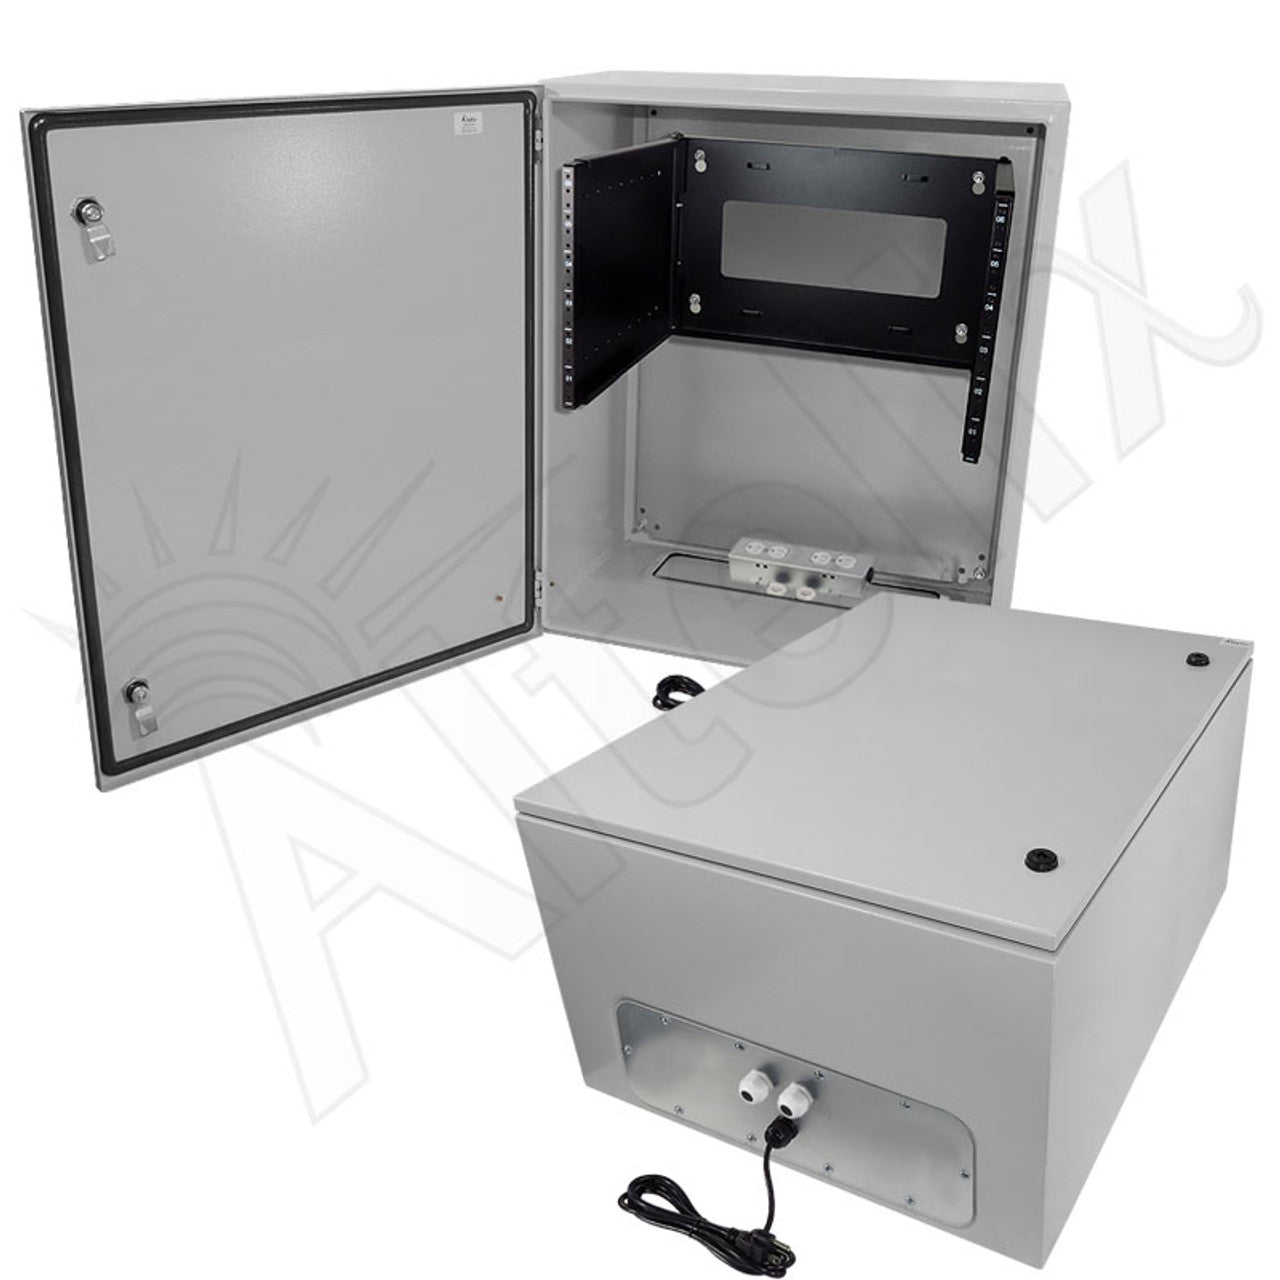 Altelix 19" Wide 6U Rack NEMA 4X Steel Weatherproof Enclosure with 120 VAC Outlets and Power Cord-5